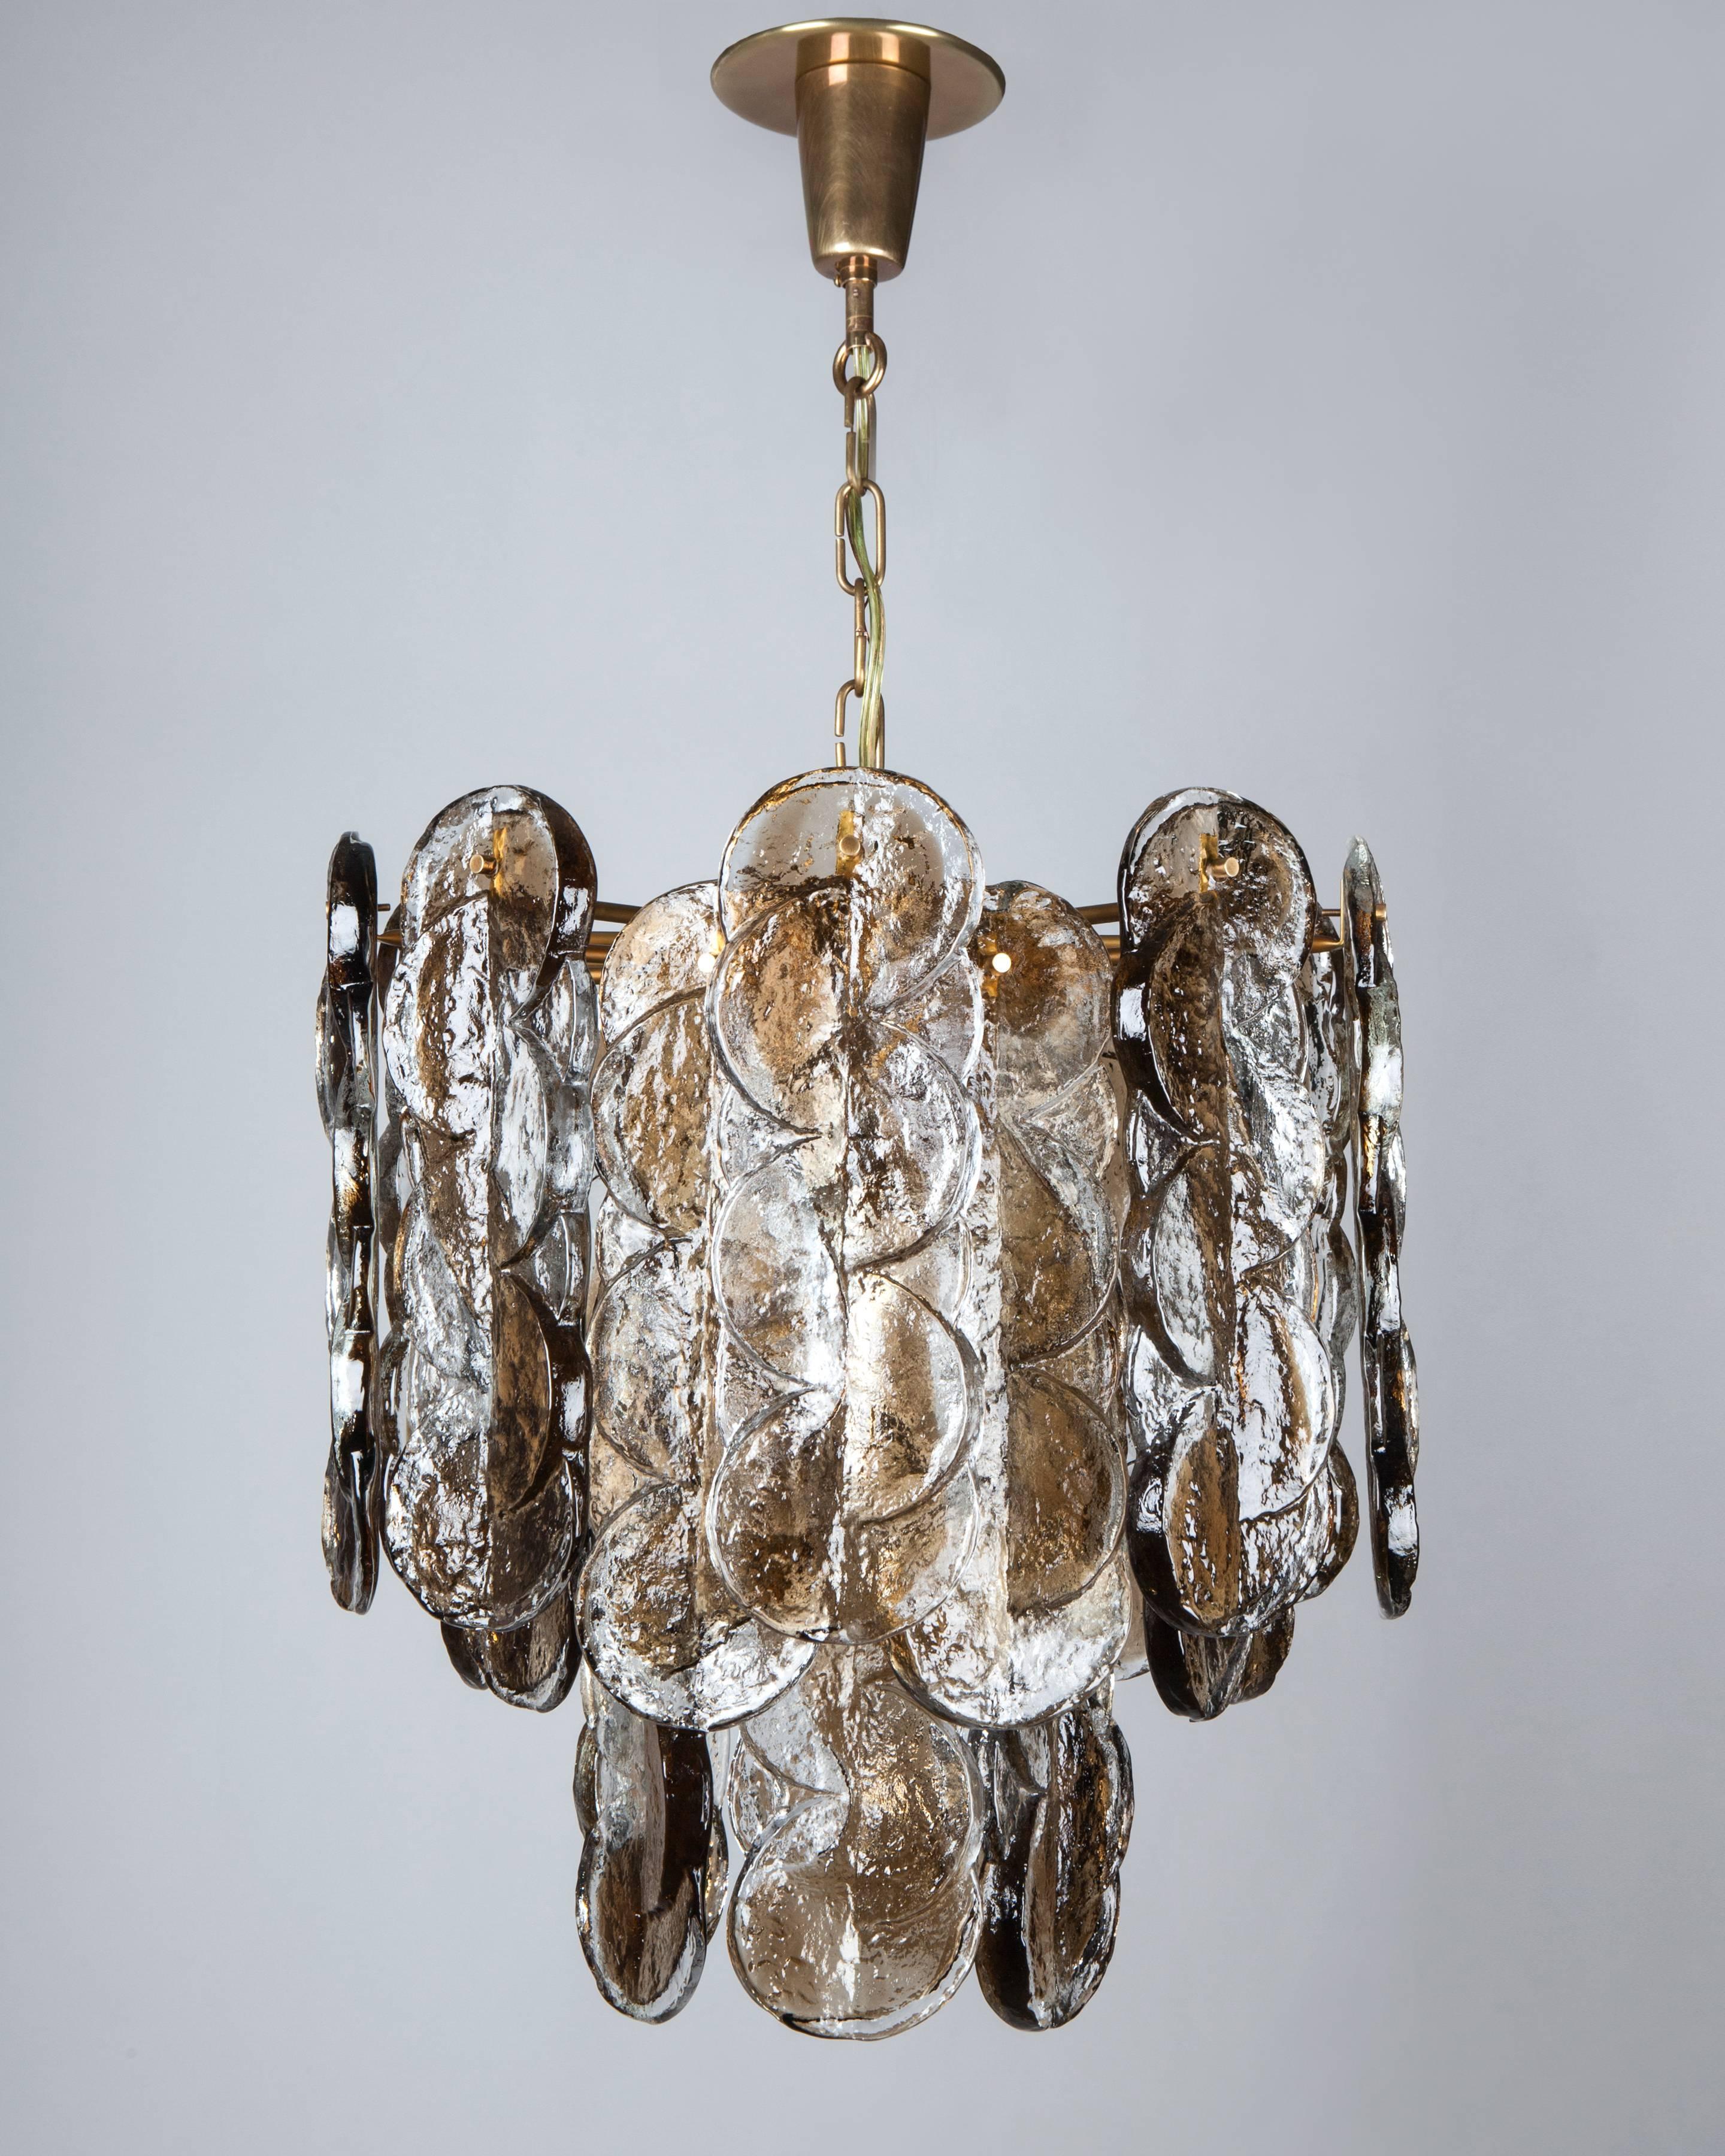 AHL4098
A vintage smoke and clear textured glass chandelier suspended from a frame in an age-darkened lacquered brass finish. Signed by the Austrian glassmaker Kalmar.

Due to the antique nature of this fixture, there may be some nicks or